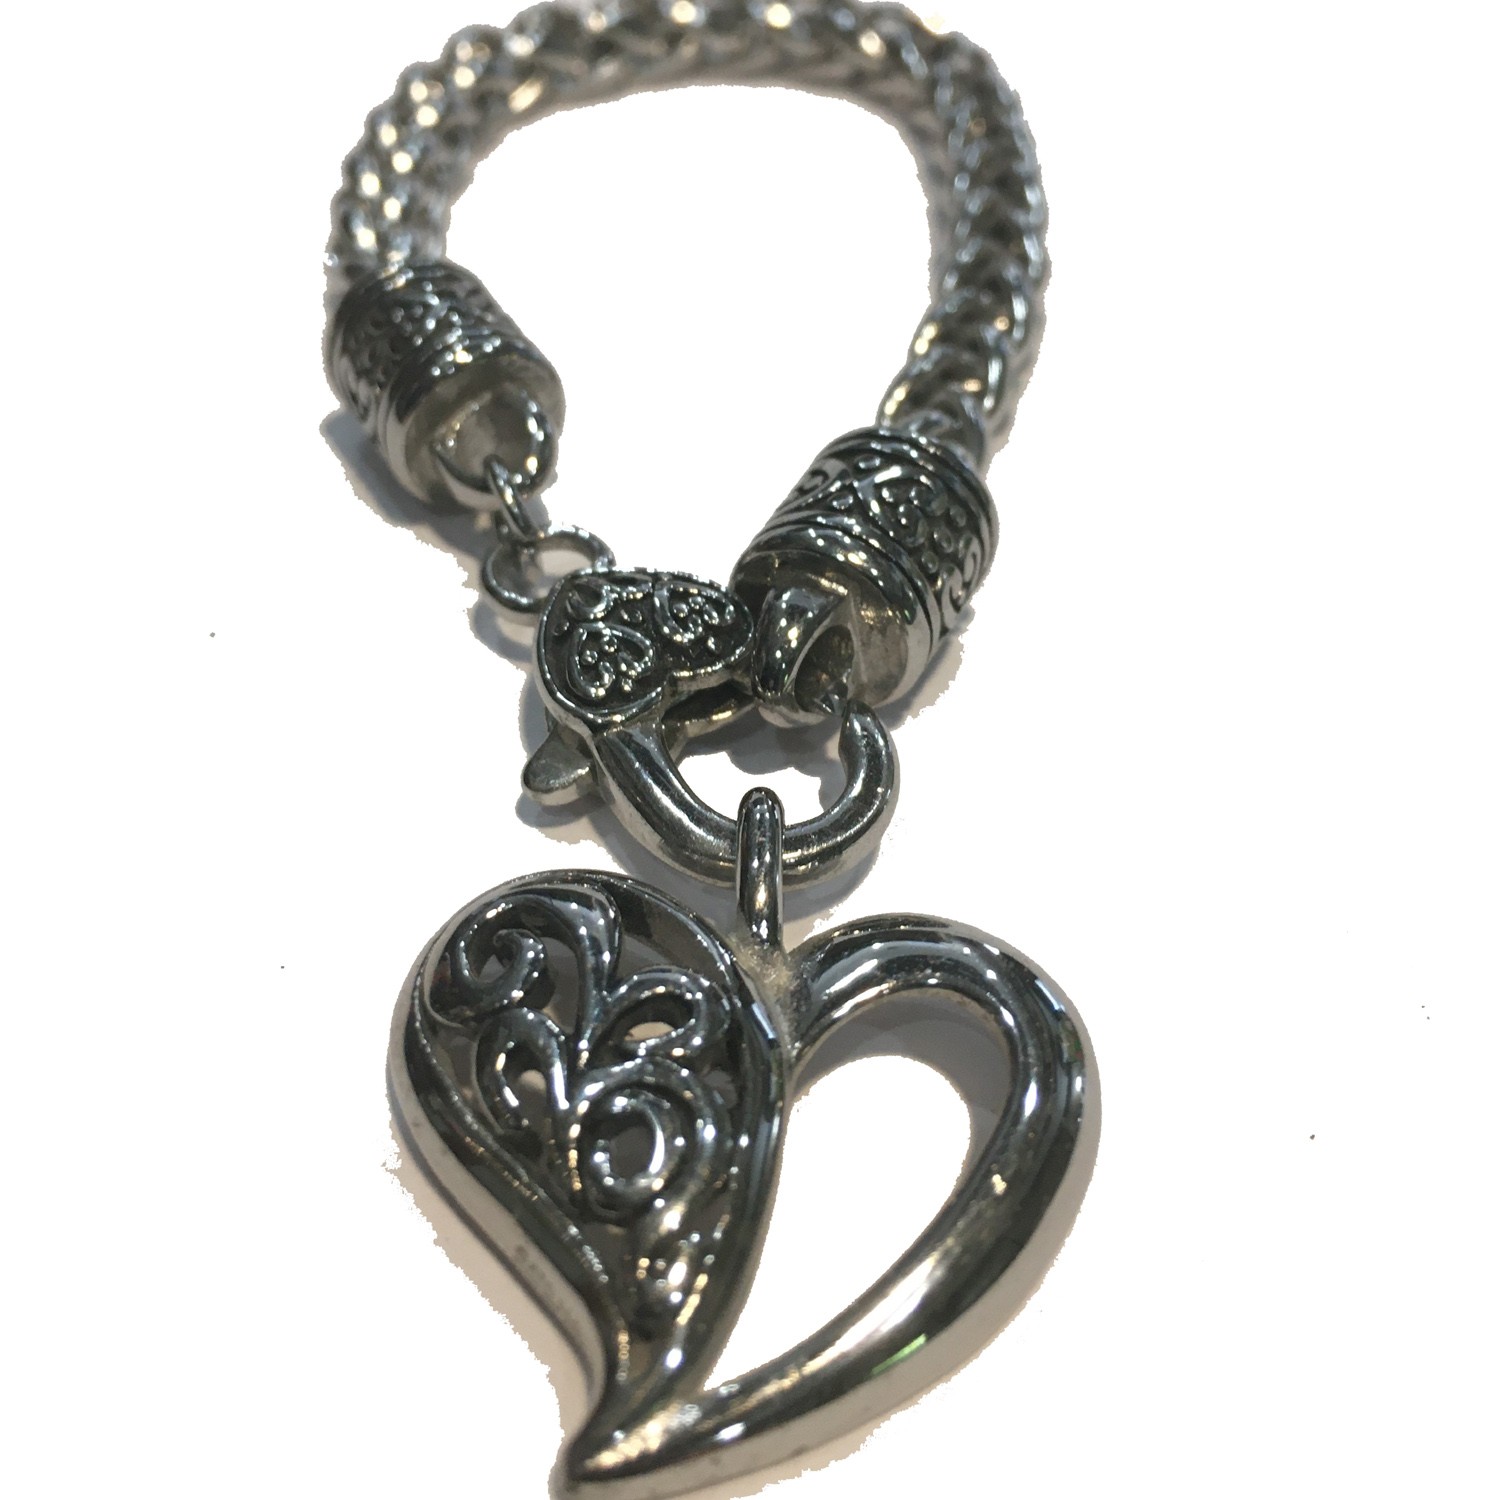 HEART FILIGREE CHARM BRACELET LADIES WITH HEART CLASP WIDE CHAIN STAINLESS STEEL